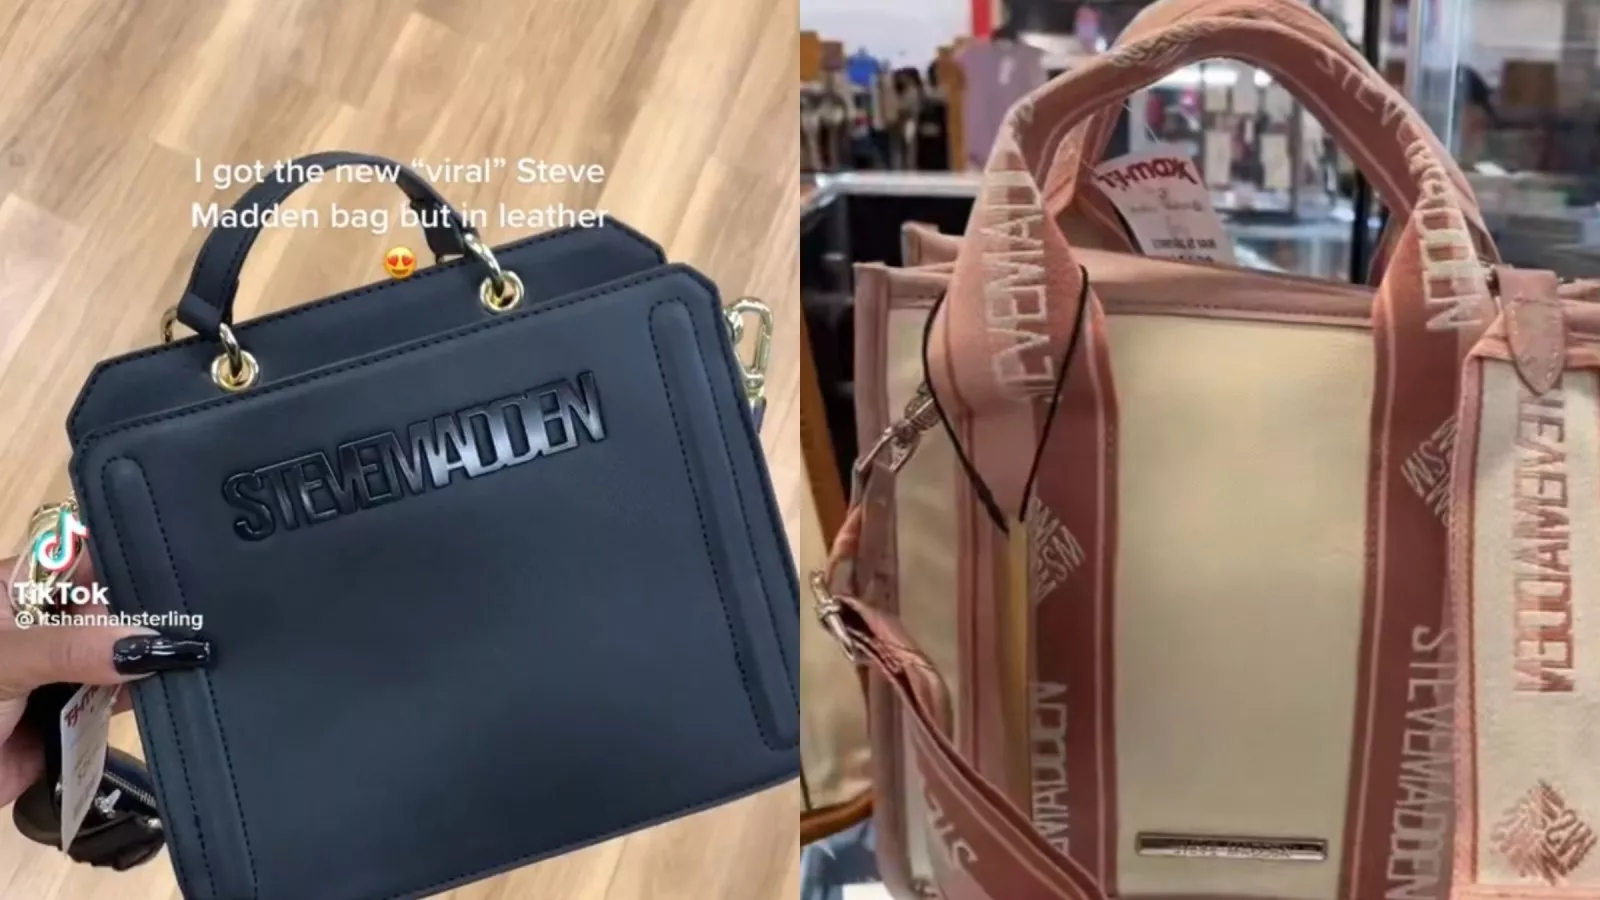 aterrizaje capitalismo delicado Where to Find the Steve Madden Bags Everyone Is Obsessing Over on TikTok